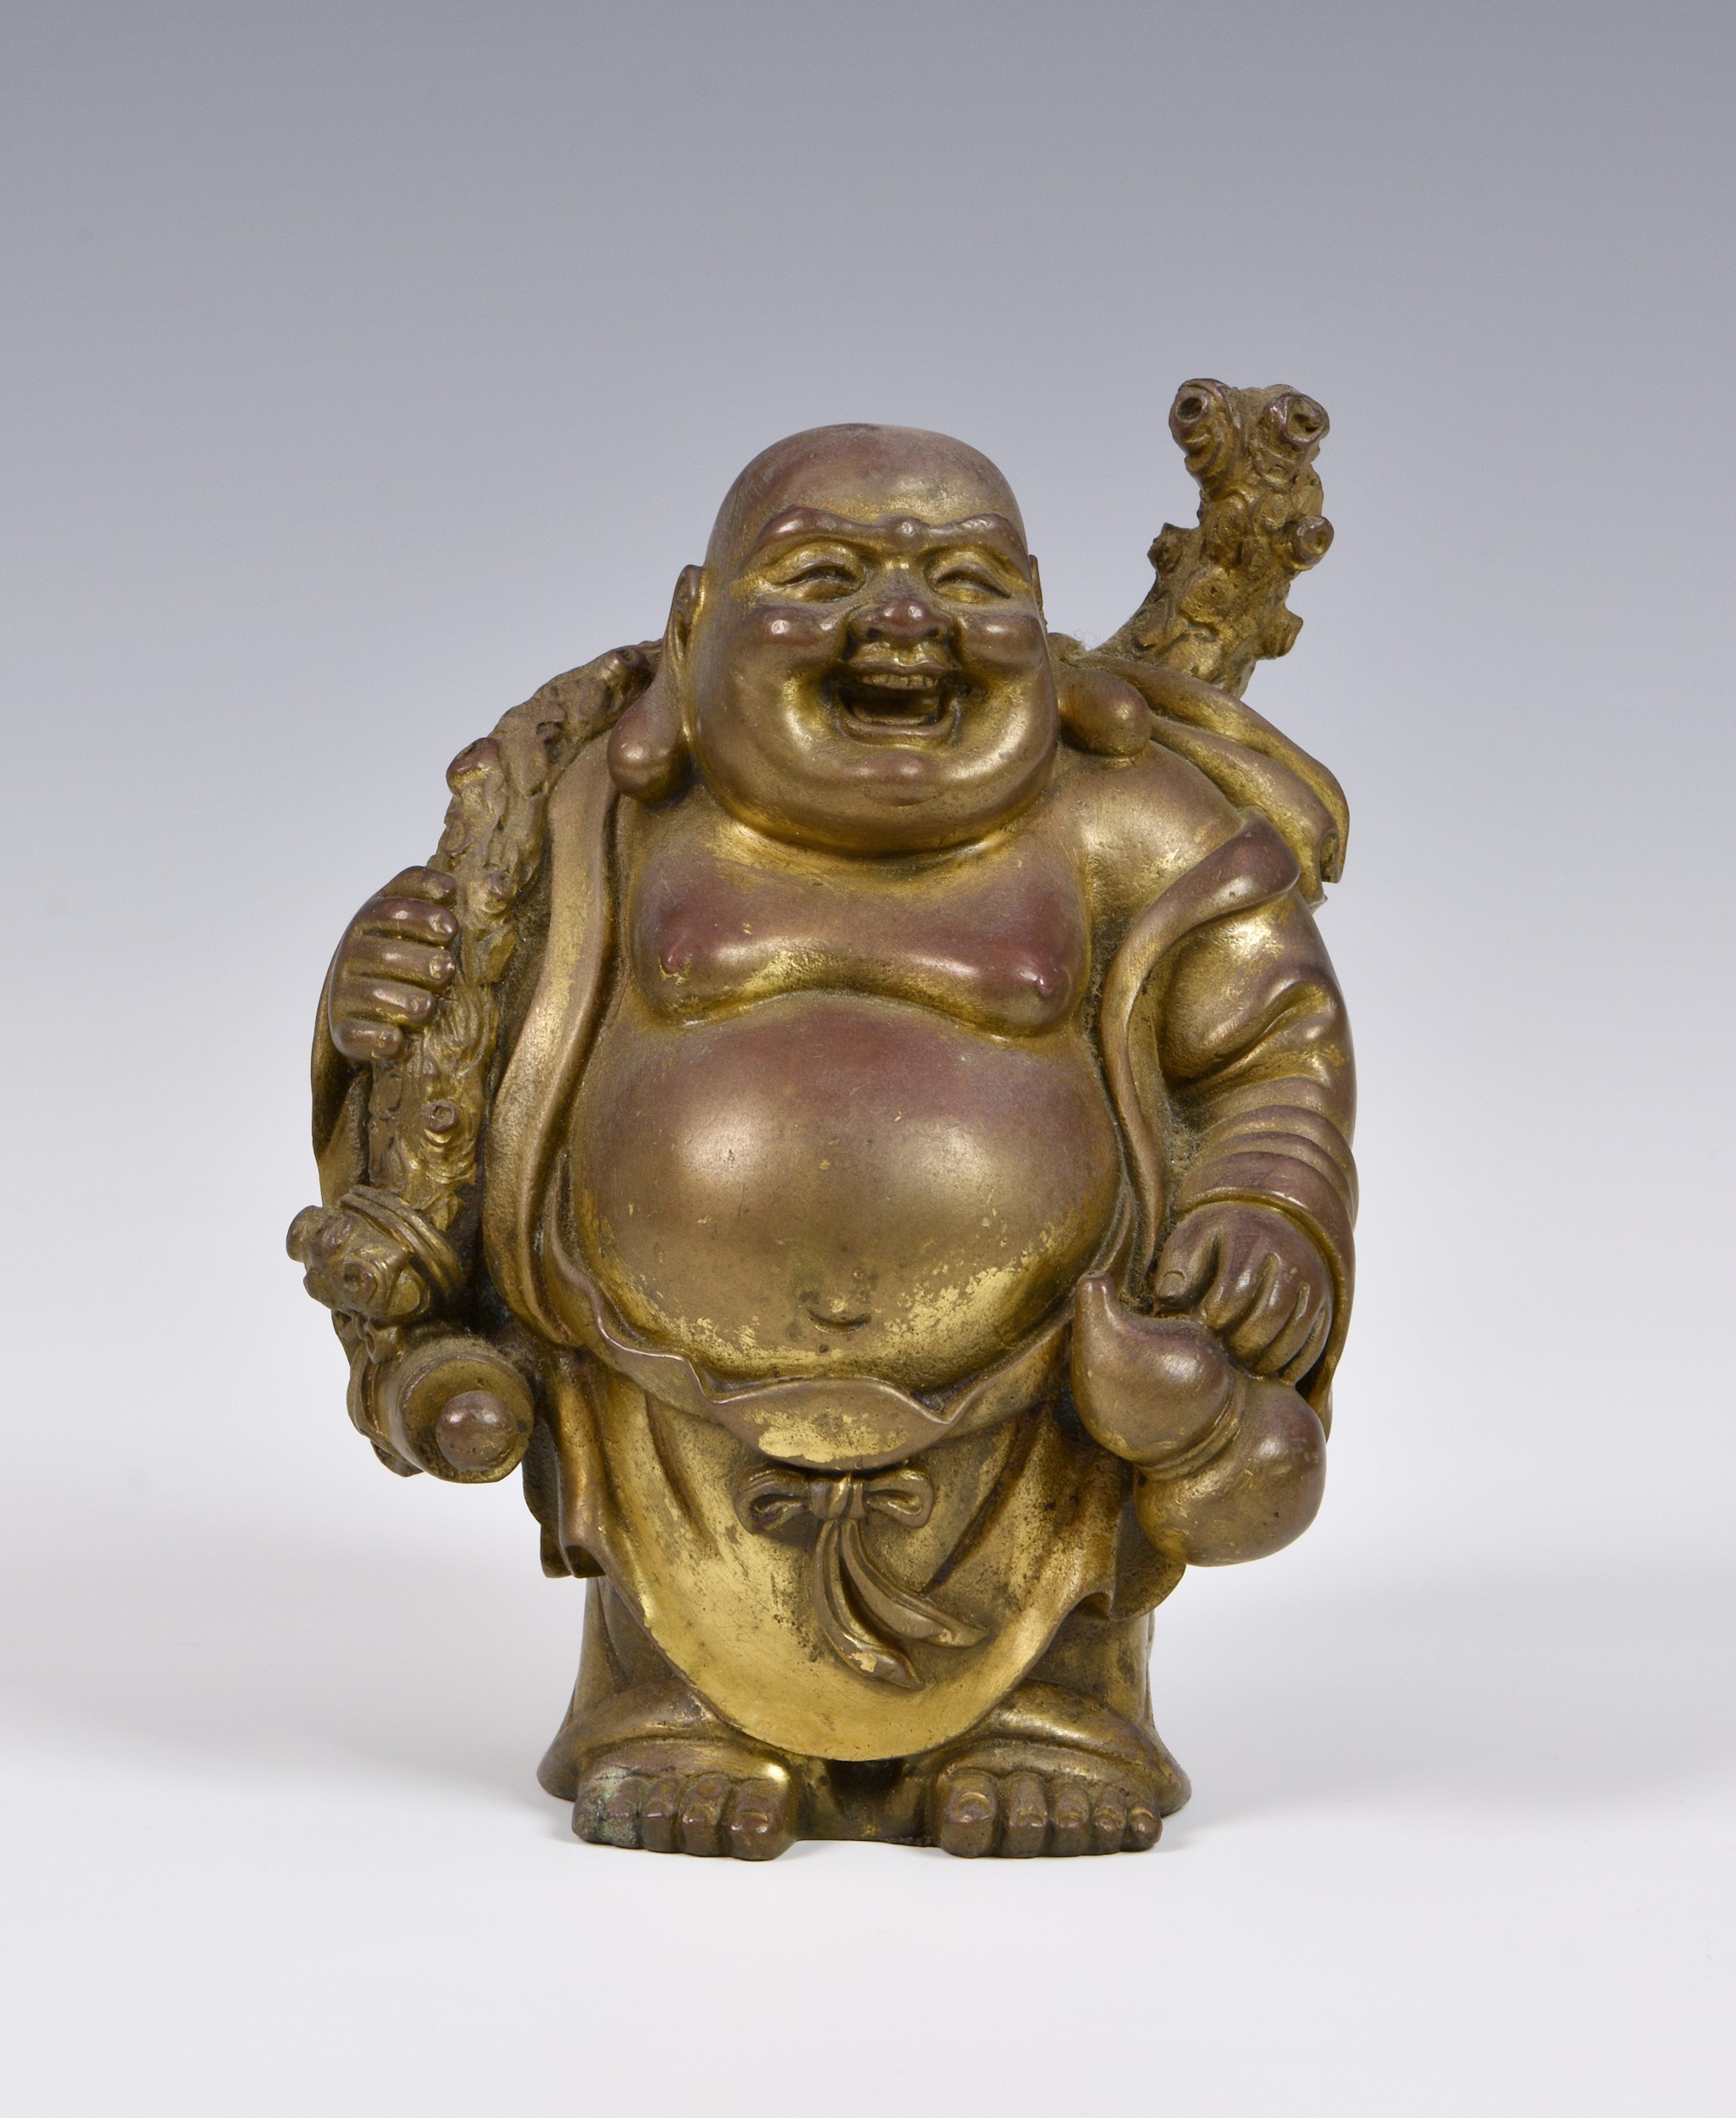 A Chinese gilt bronze buddha figure, probably early 20th century, modelled in standing position,